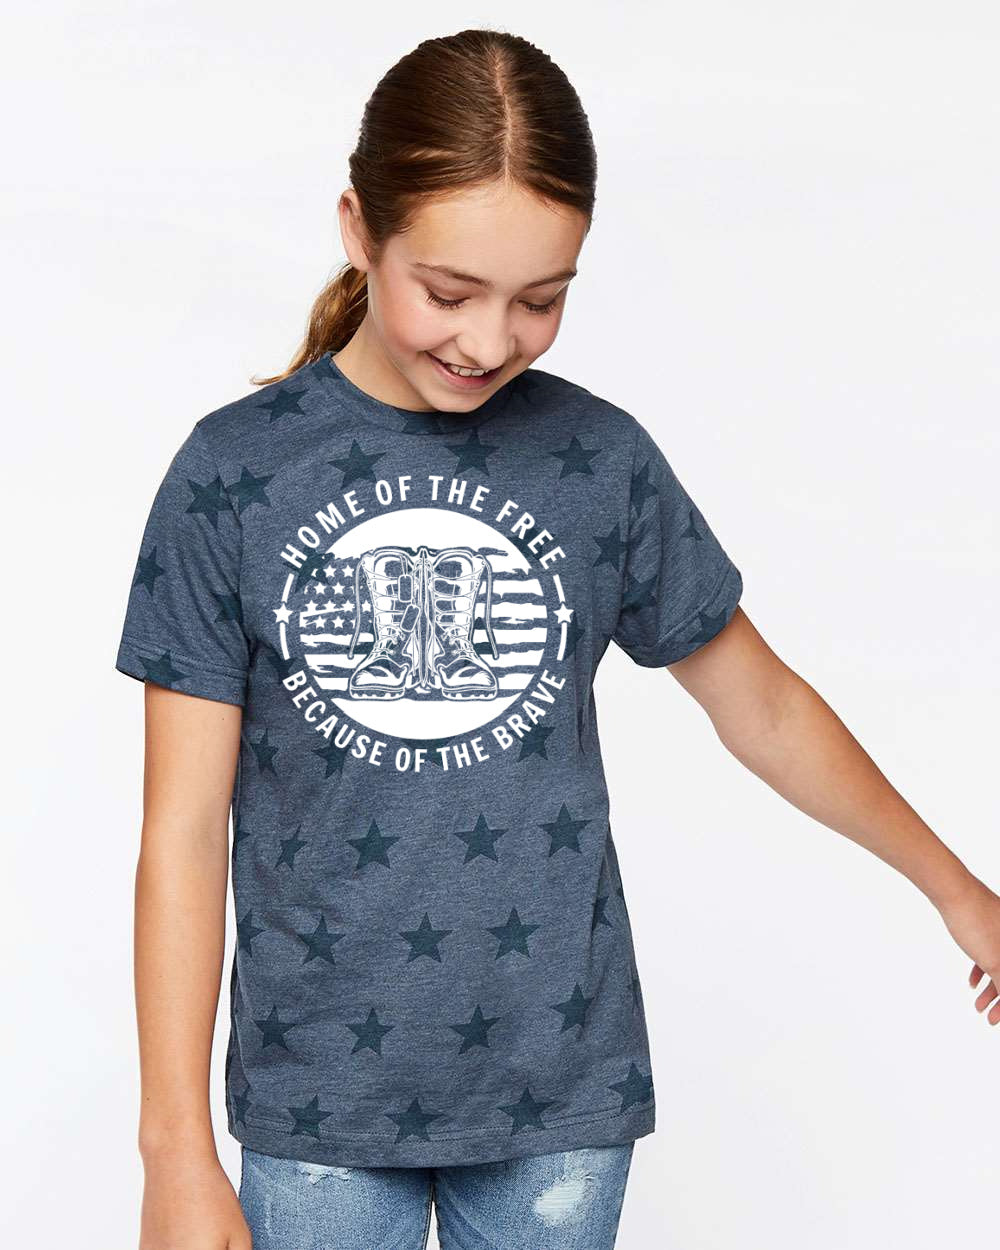 Home Of The Free [KID SIZES]